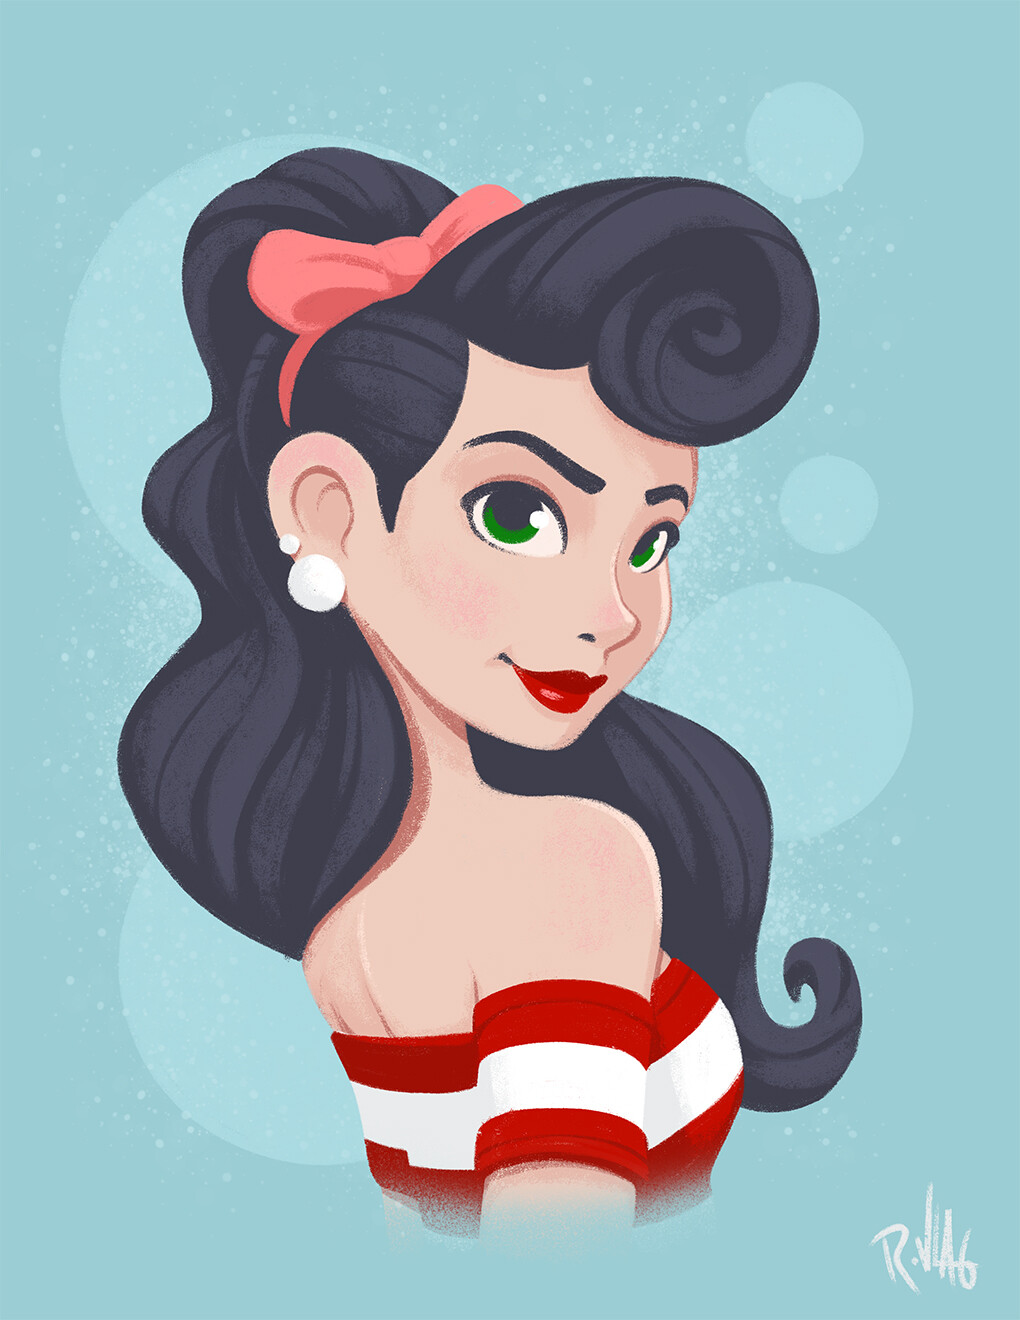 Randy van der Vlag - Draw This in Your Style - Pinup Portrait